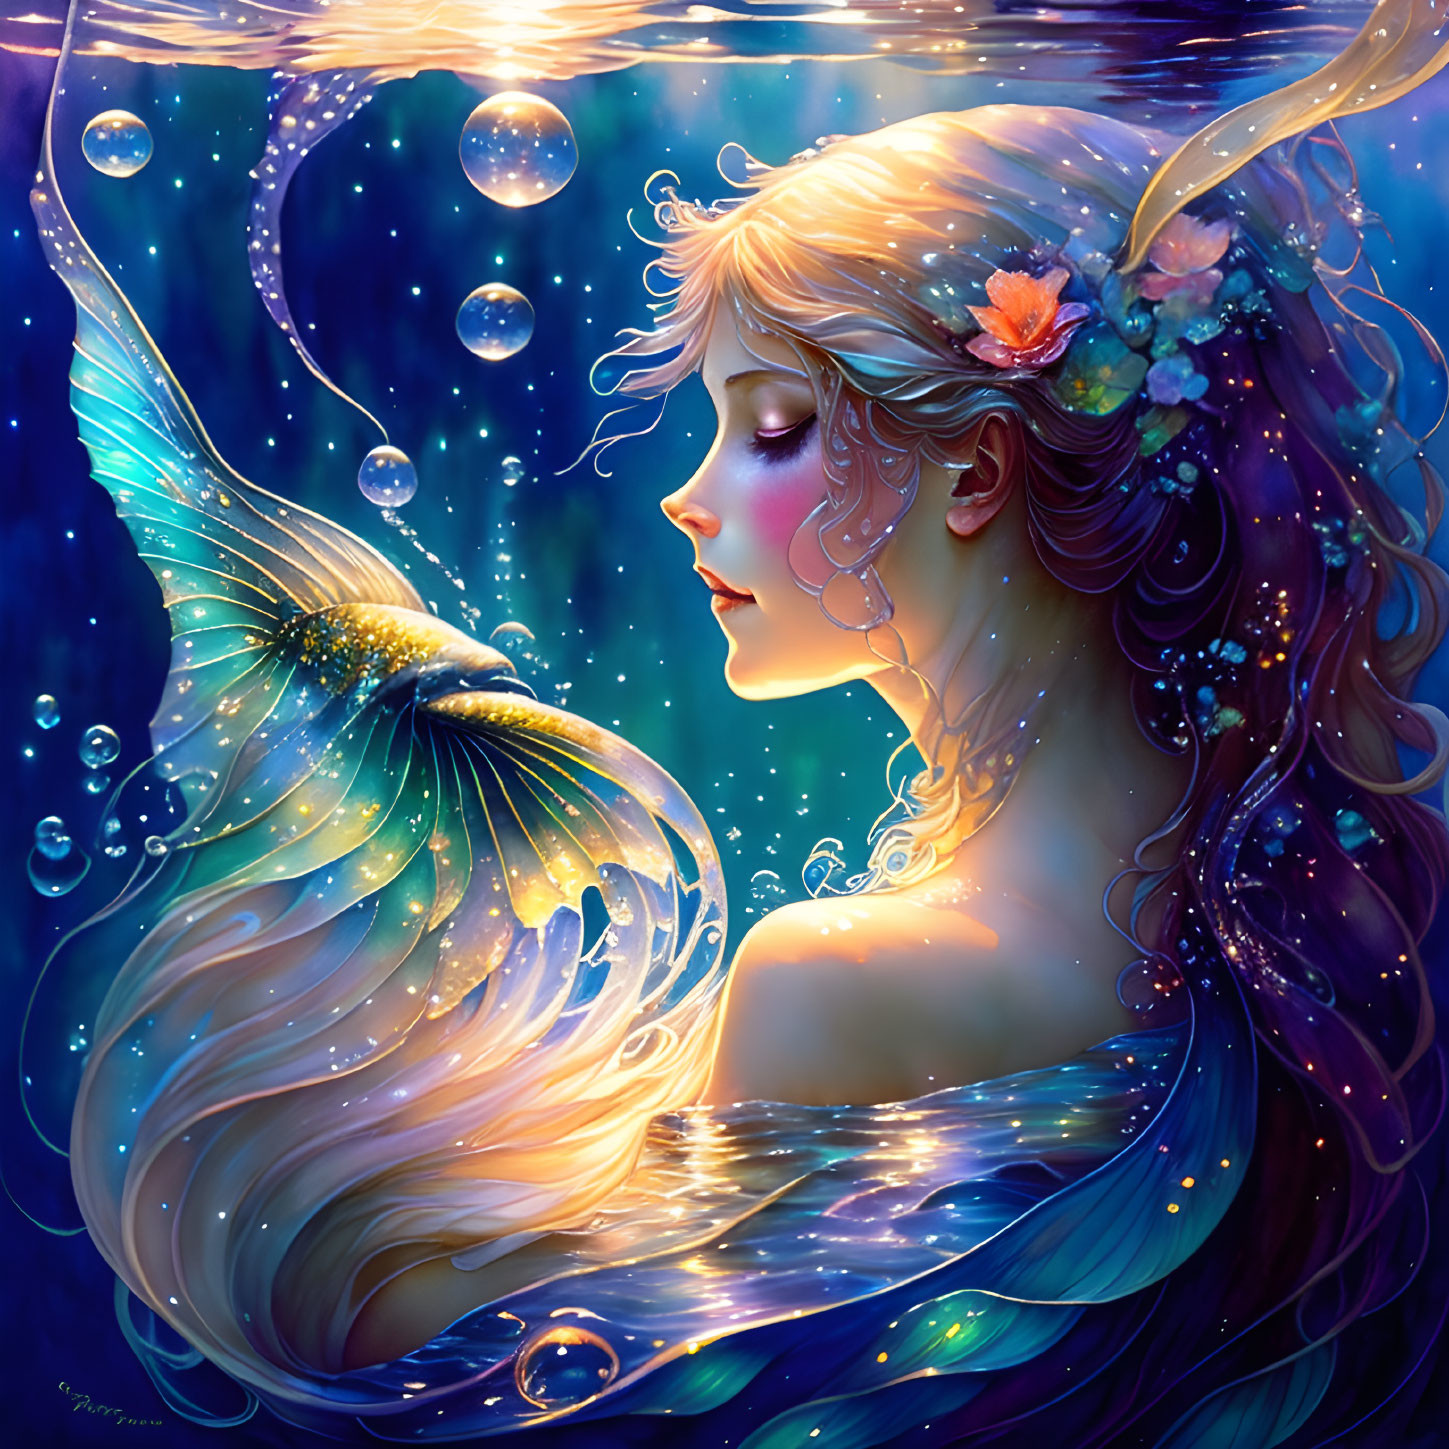 Fantasy underwater scene with woman and glowing fish-like creature